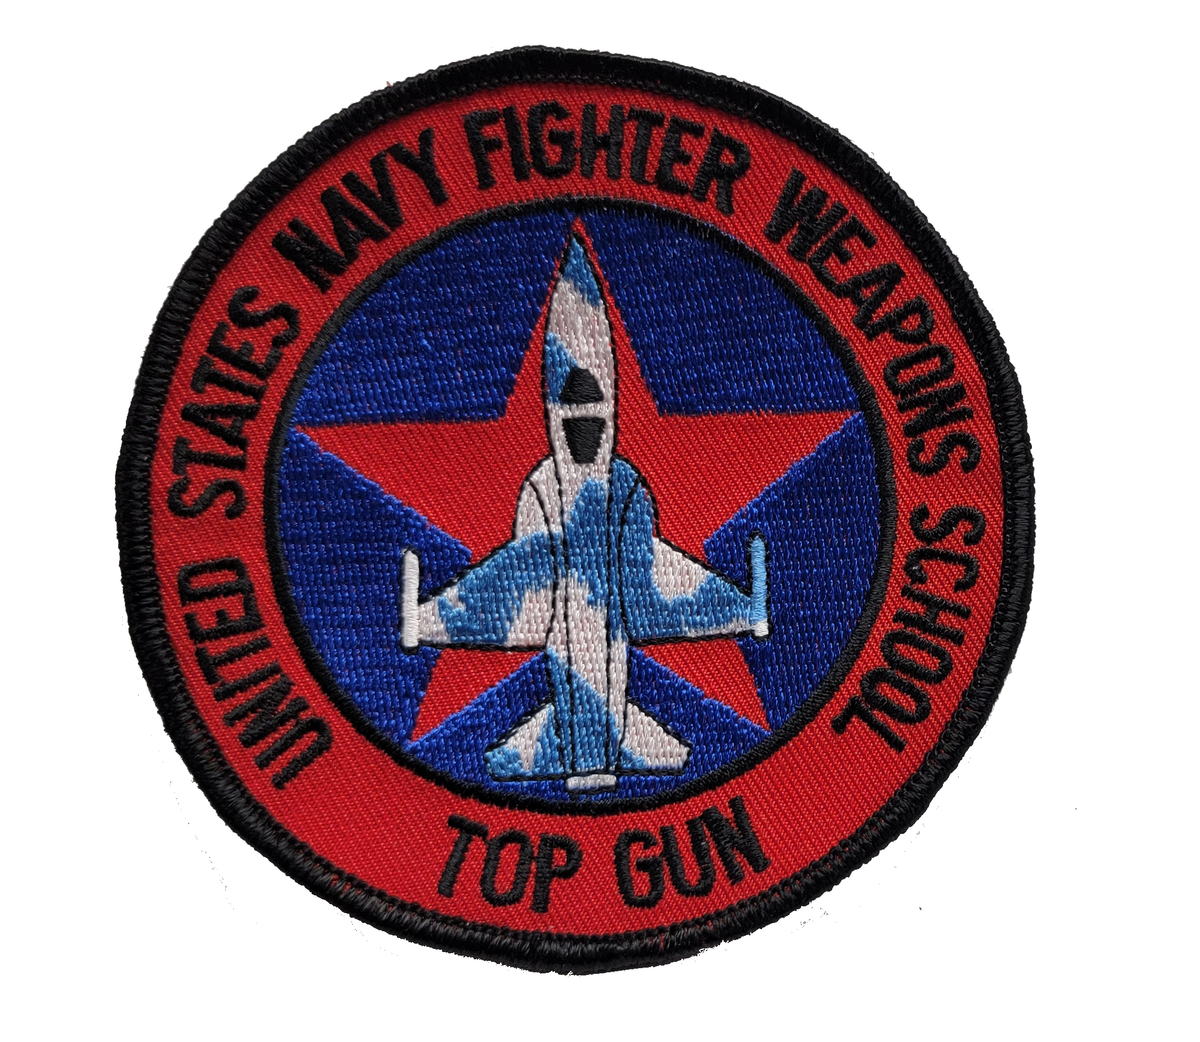 CLEARANCE - Top Gun U.S. Navy Fighter Weapons School Patch - 4 inch